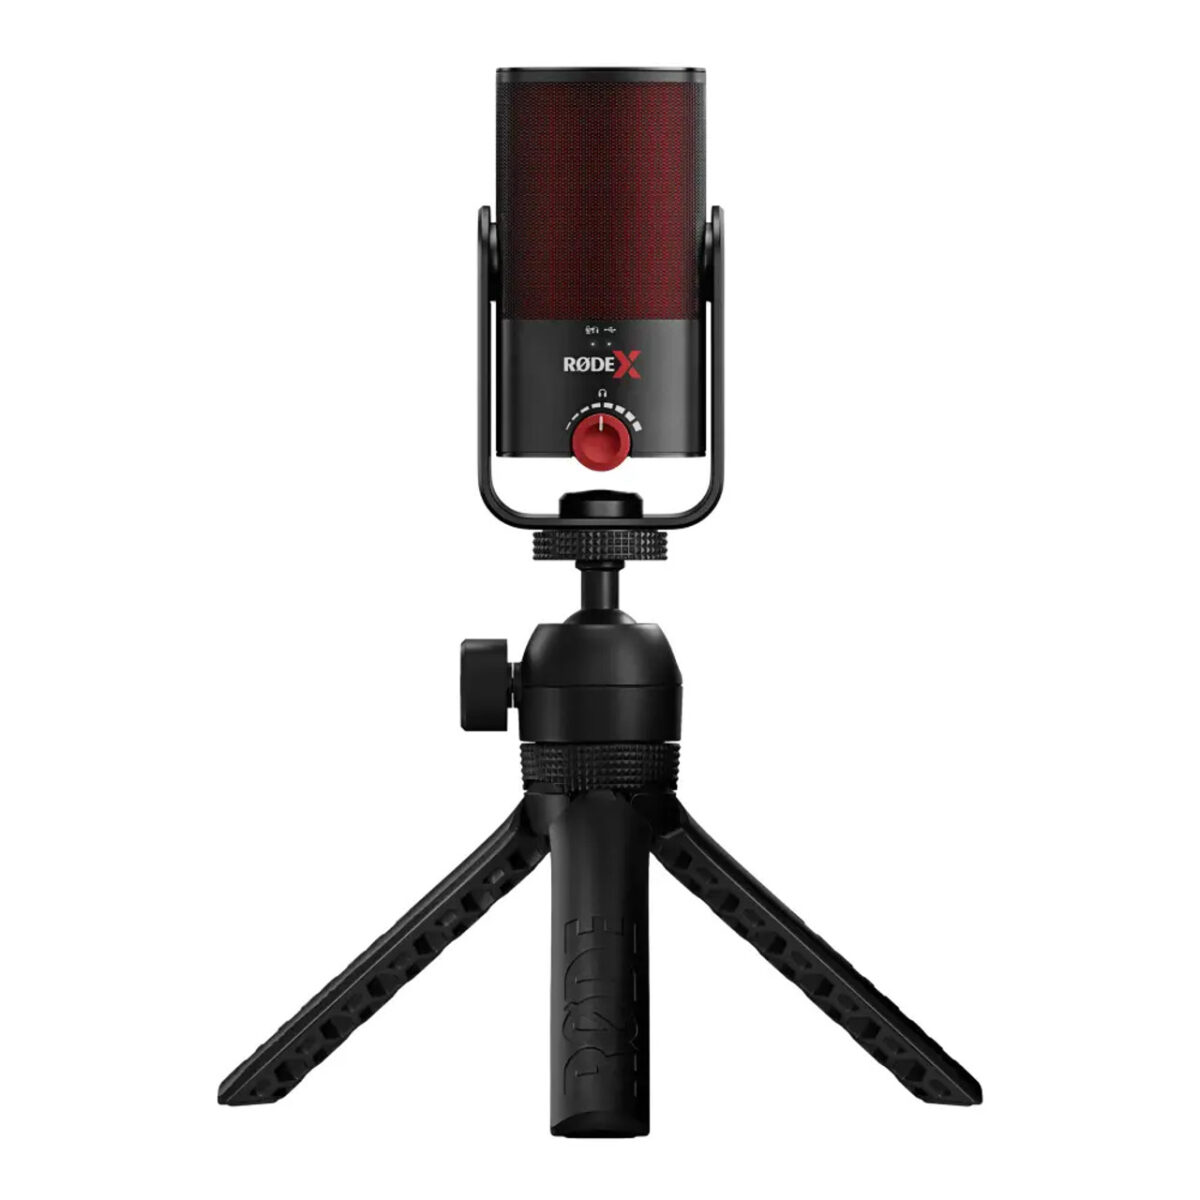 RODE XCM-50 | Professional Condenser USB Microphone